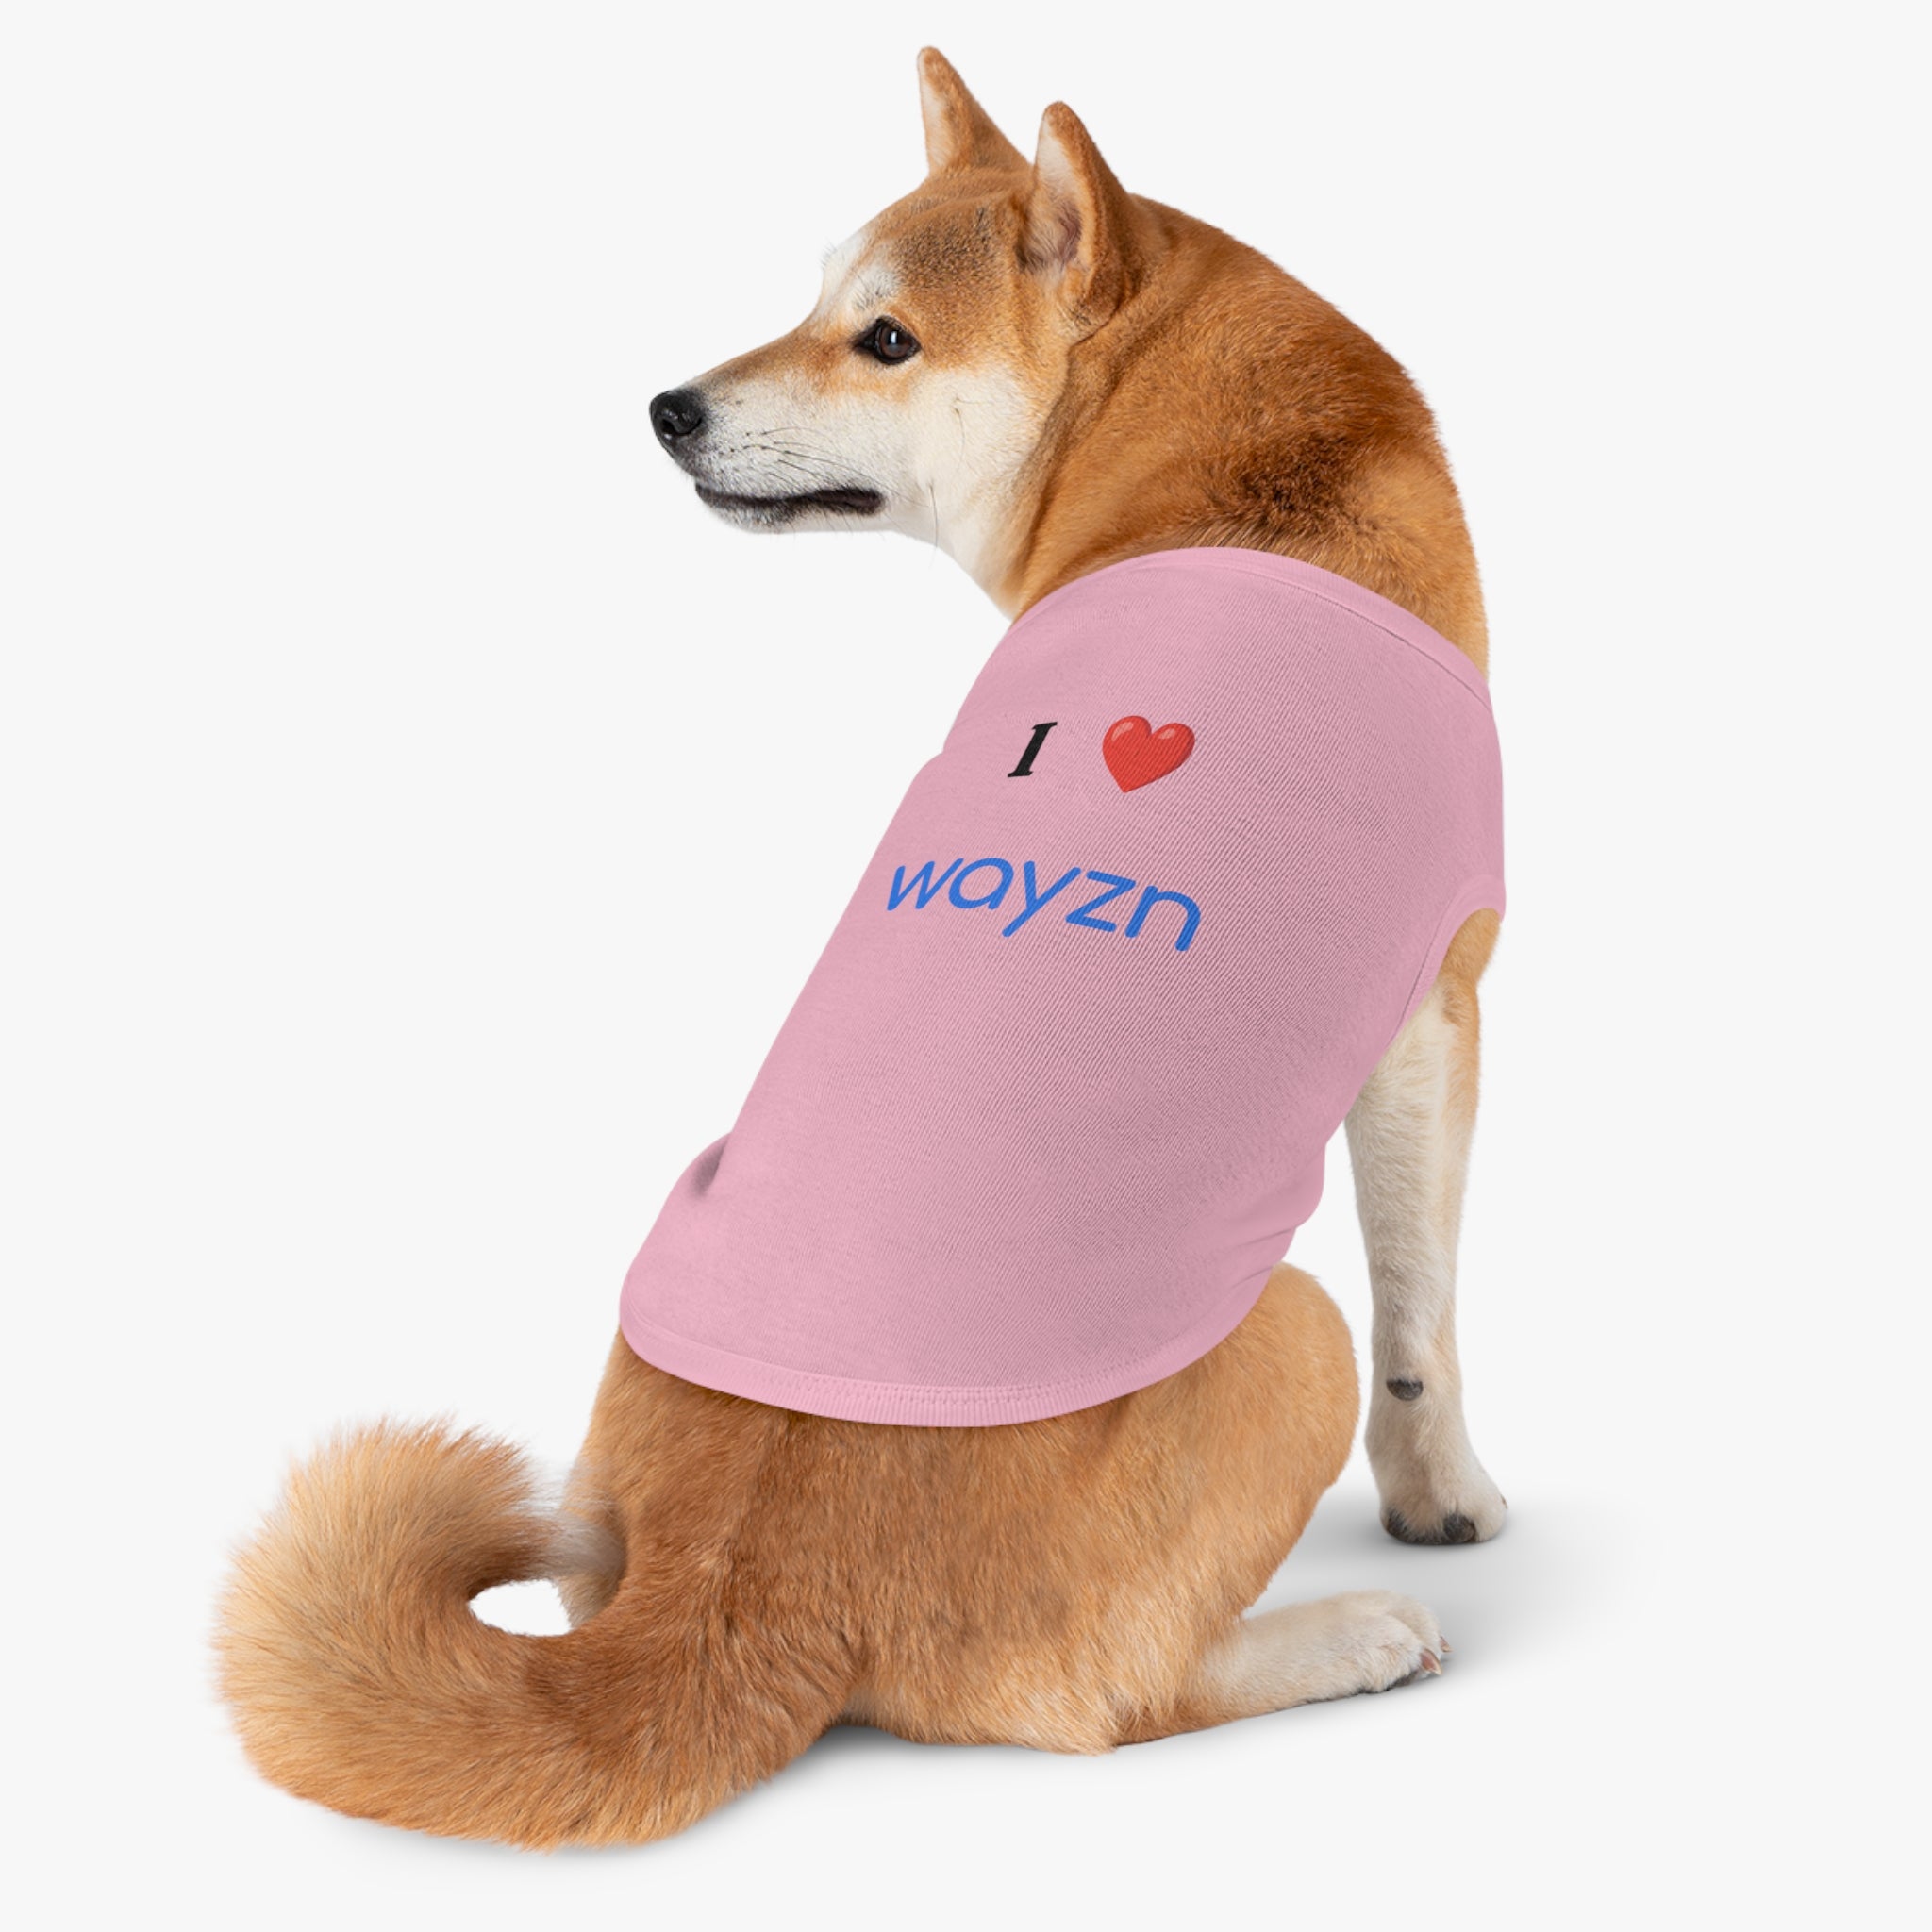 I Heart Wayzn - Dog Jersey: A dog wearing a pink shirt with a red heart on it.